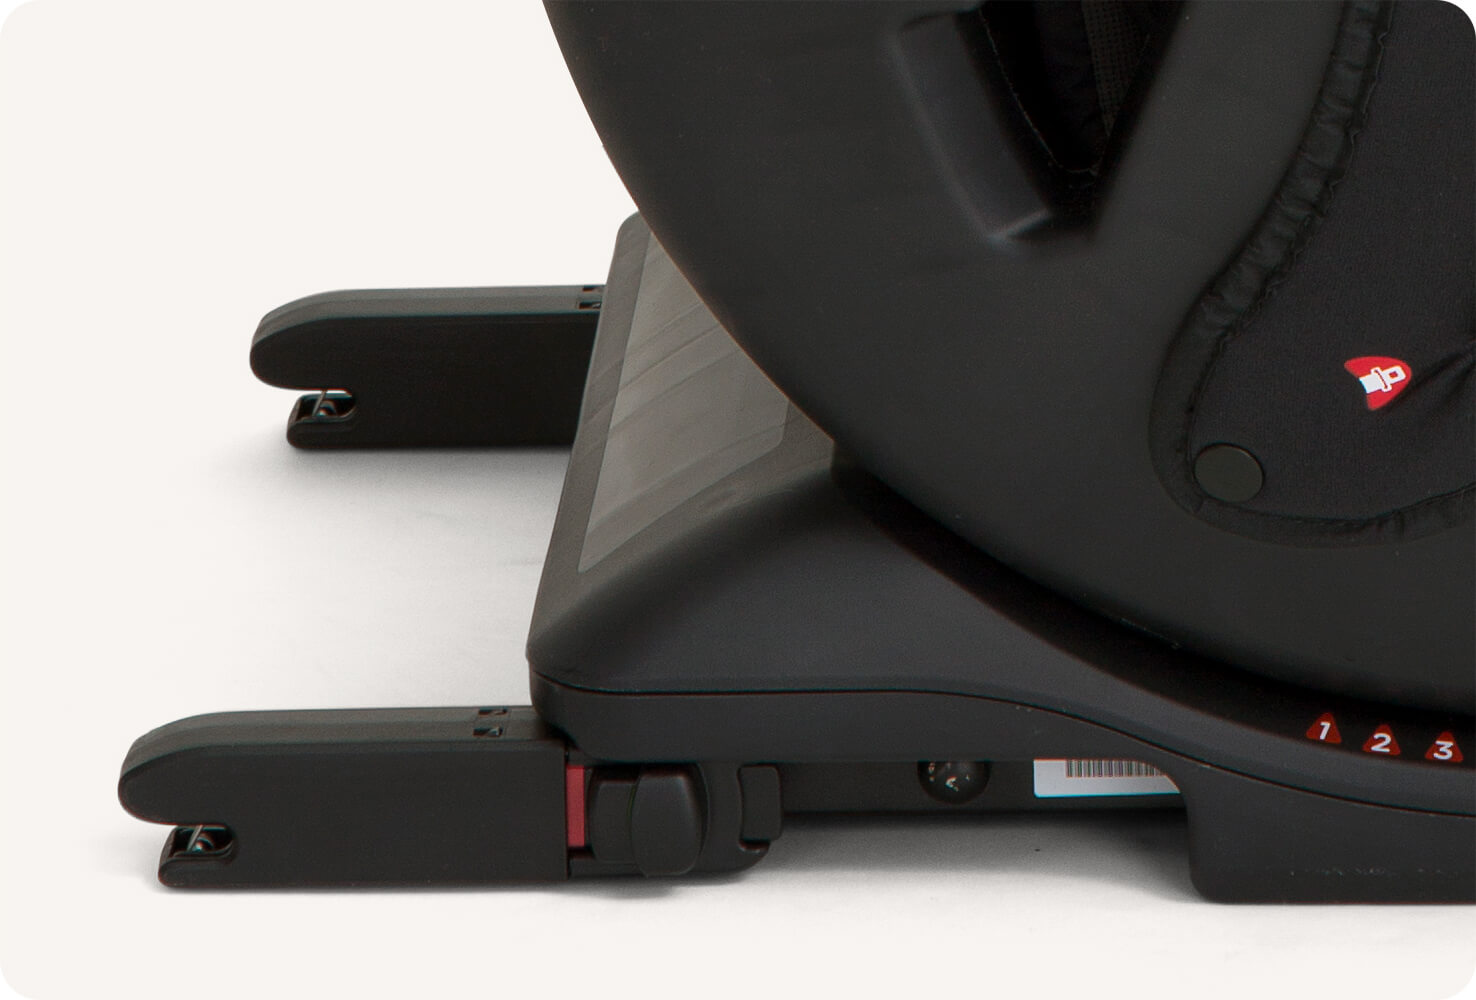 Closeup on the Joie Stages FX ISOFIX connectors